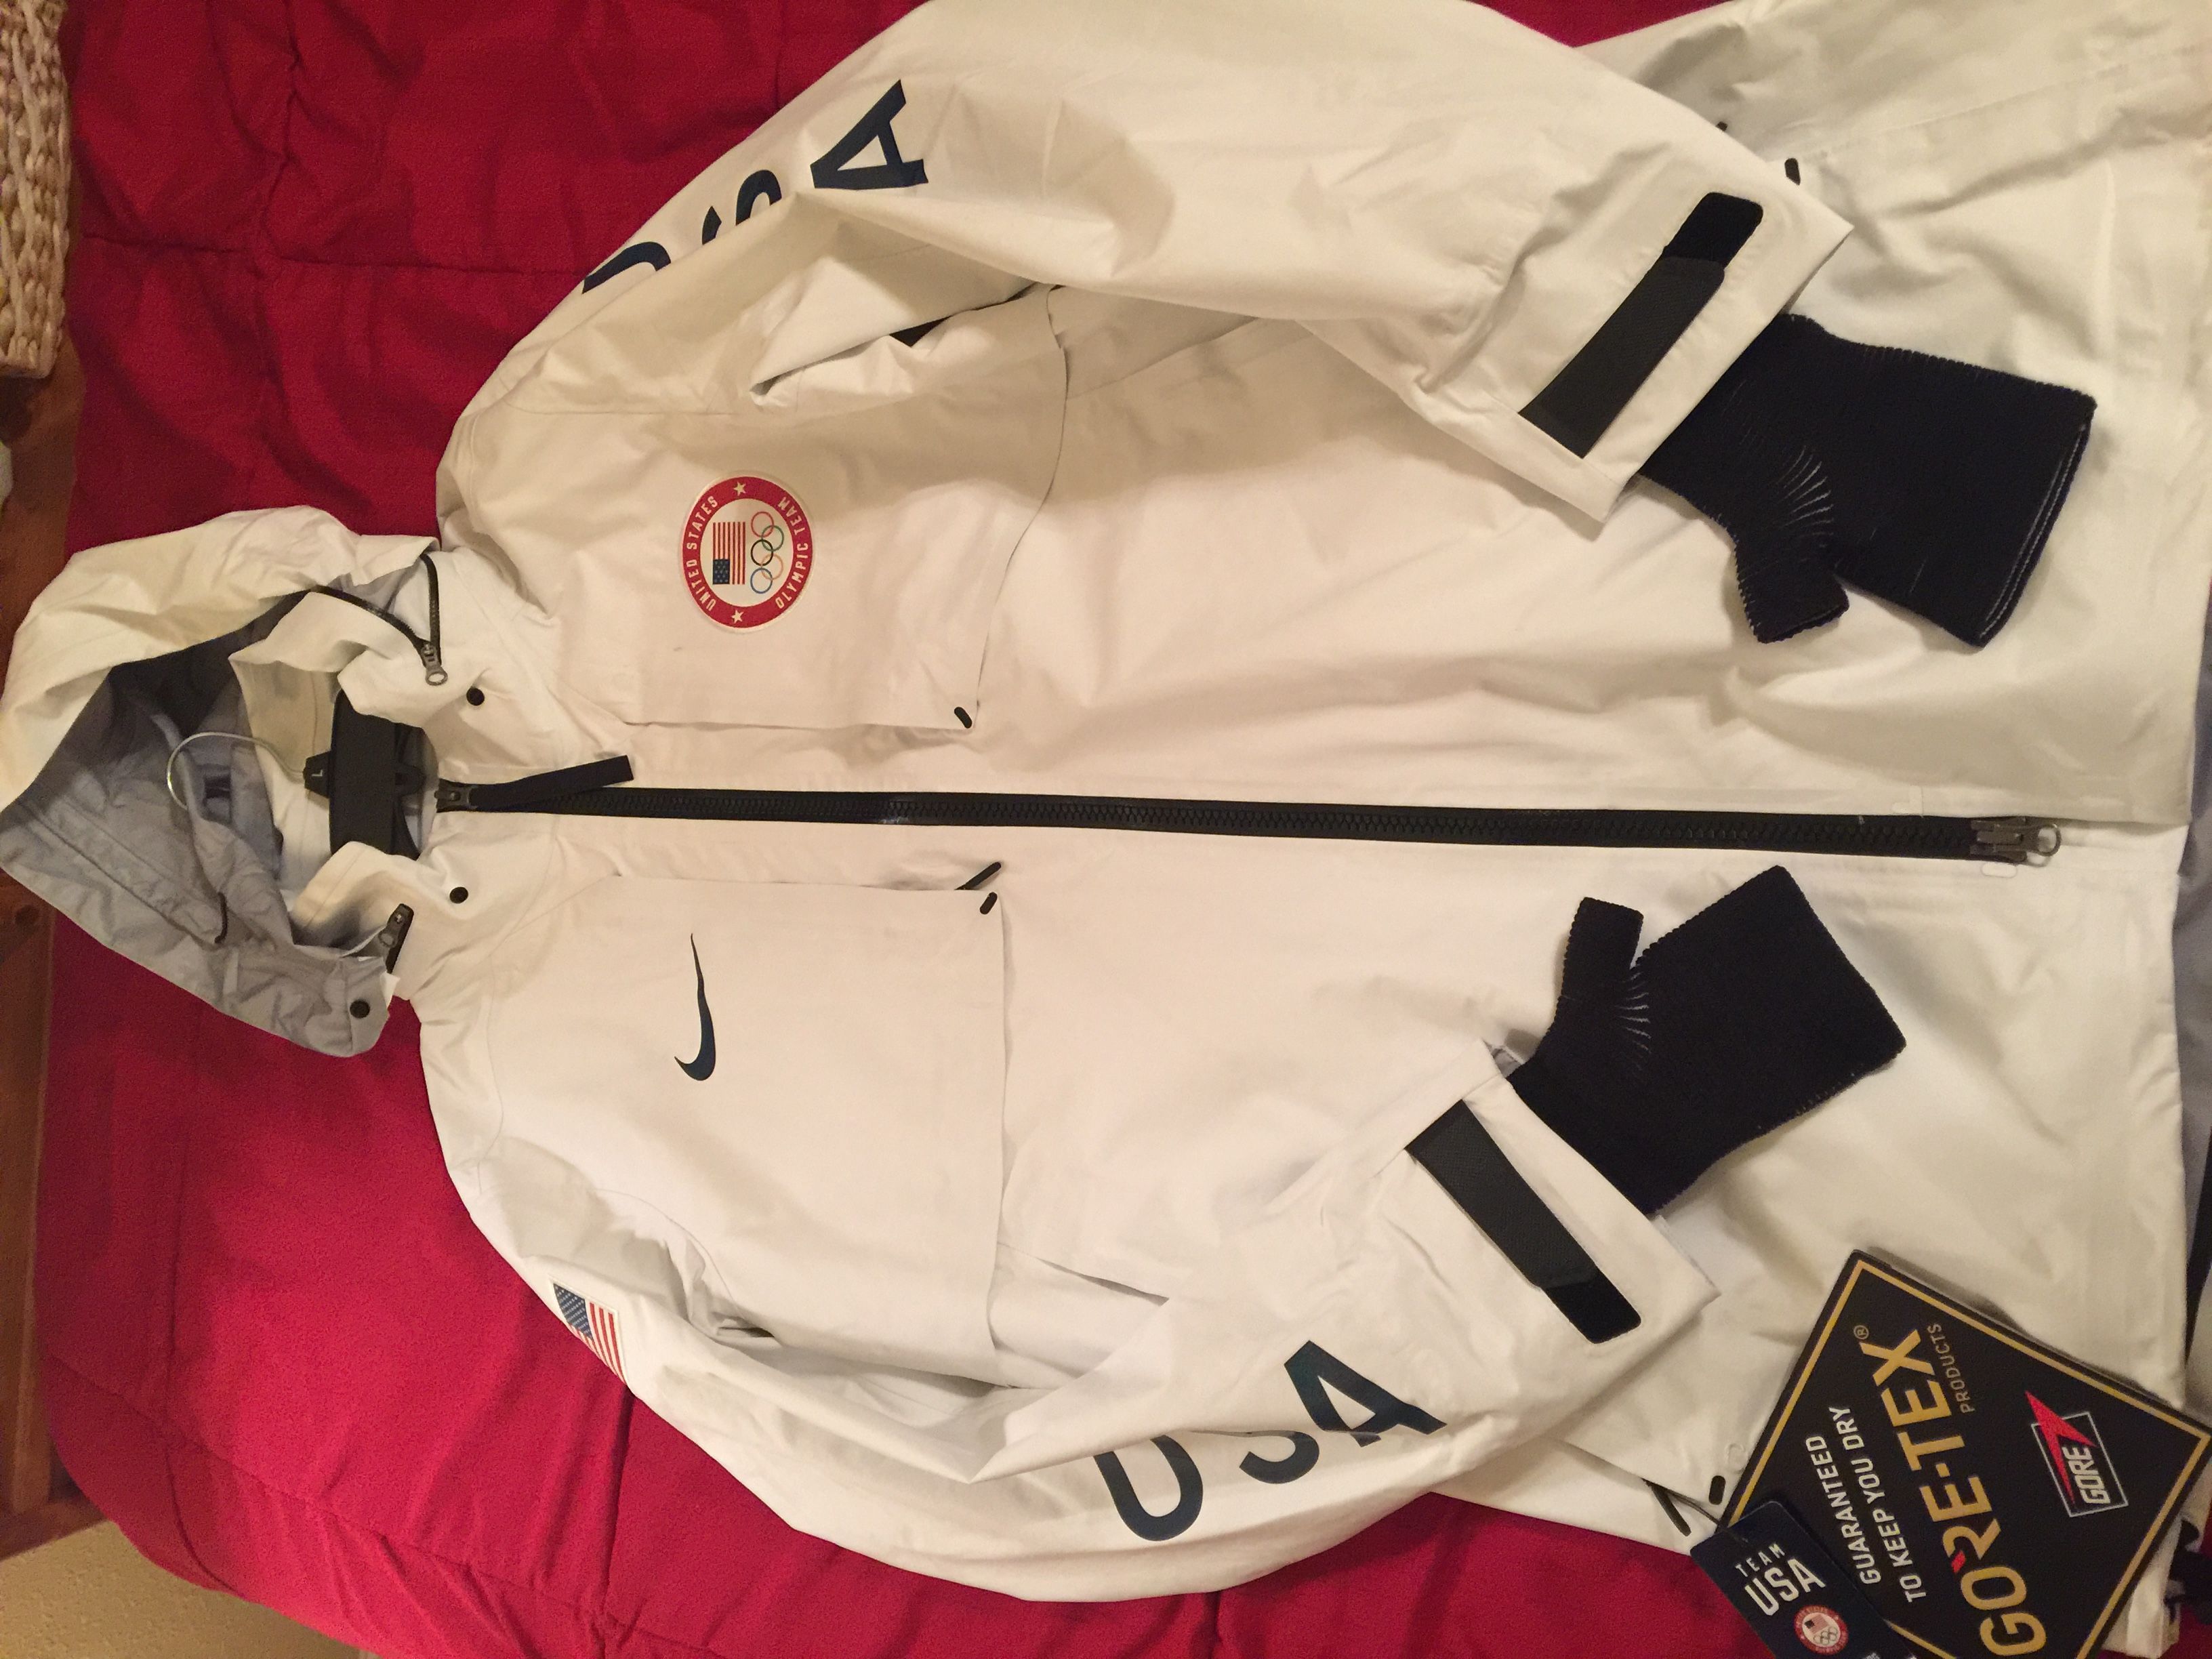 Nike Nike NikeLab Olympic Team USA Medal Stand White GoreTex Jacket Large New Size US L / EU 52-54 / 3 - 1 Preview